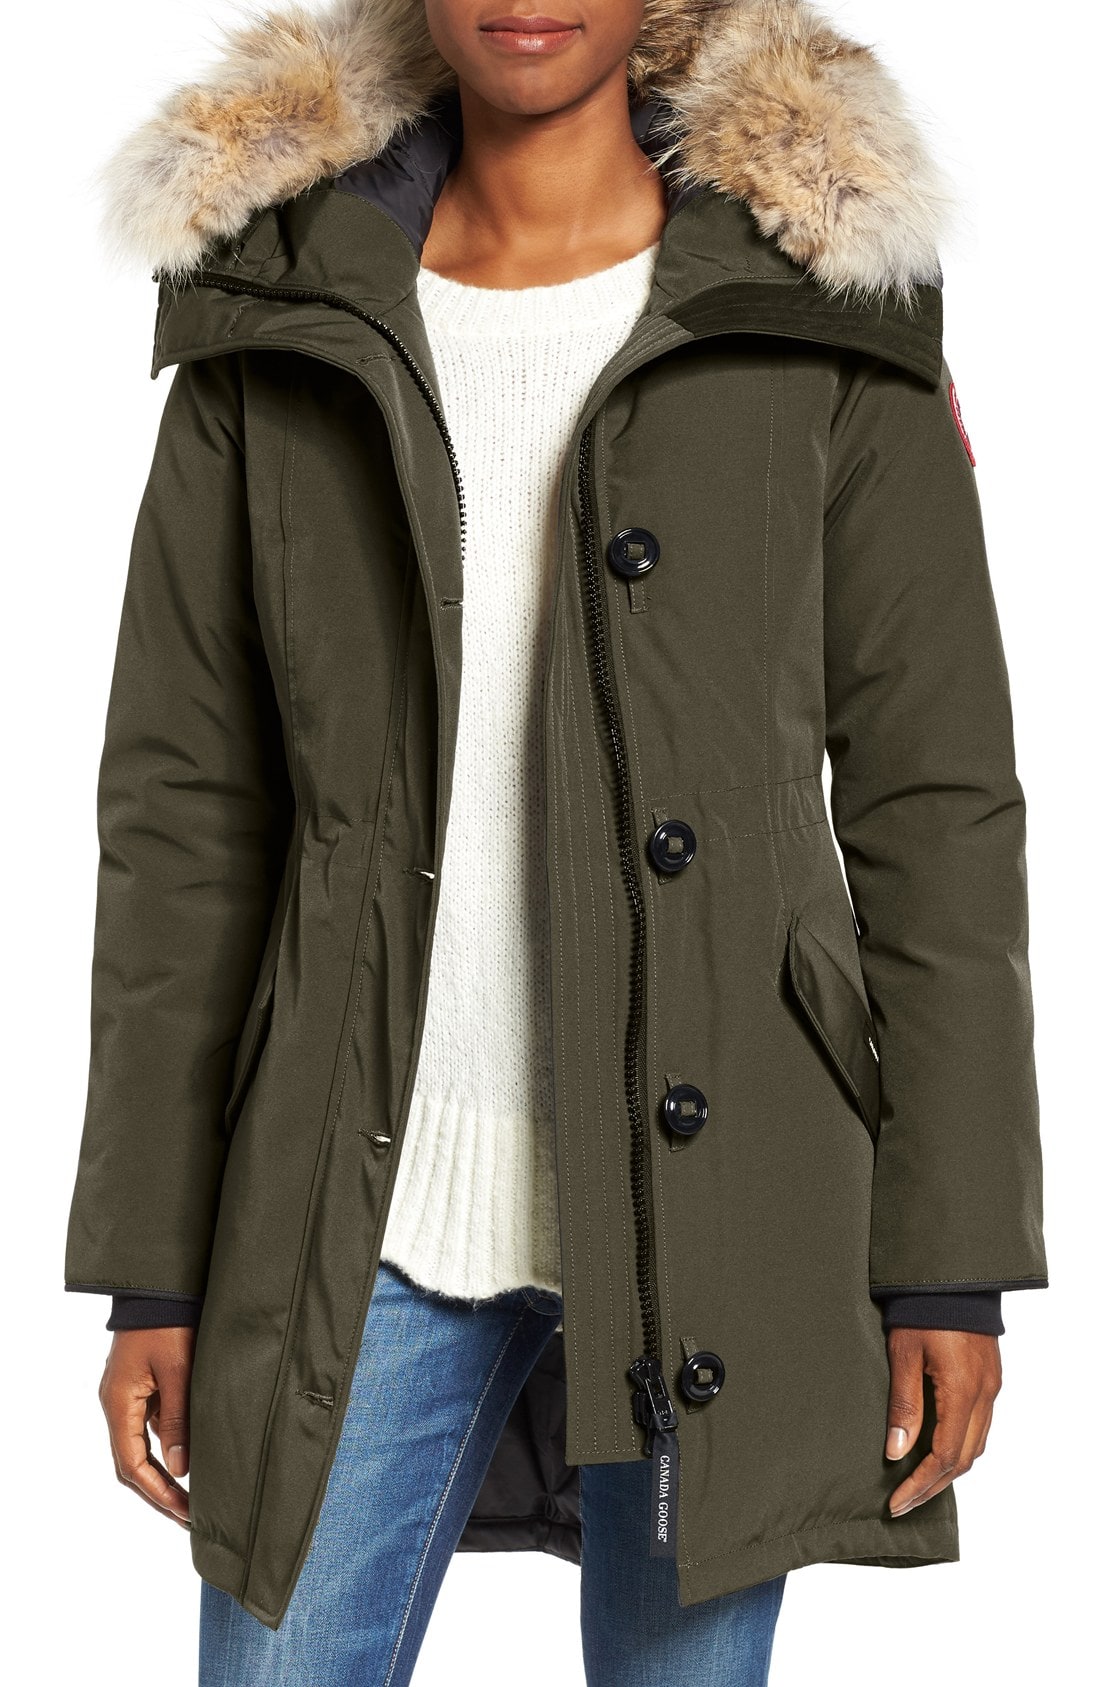 Green Parka – practical coat with history